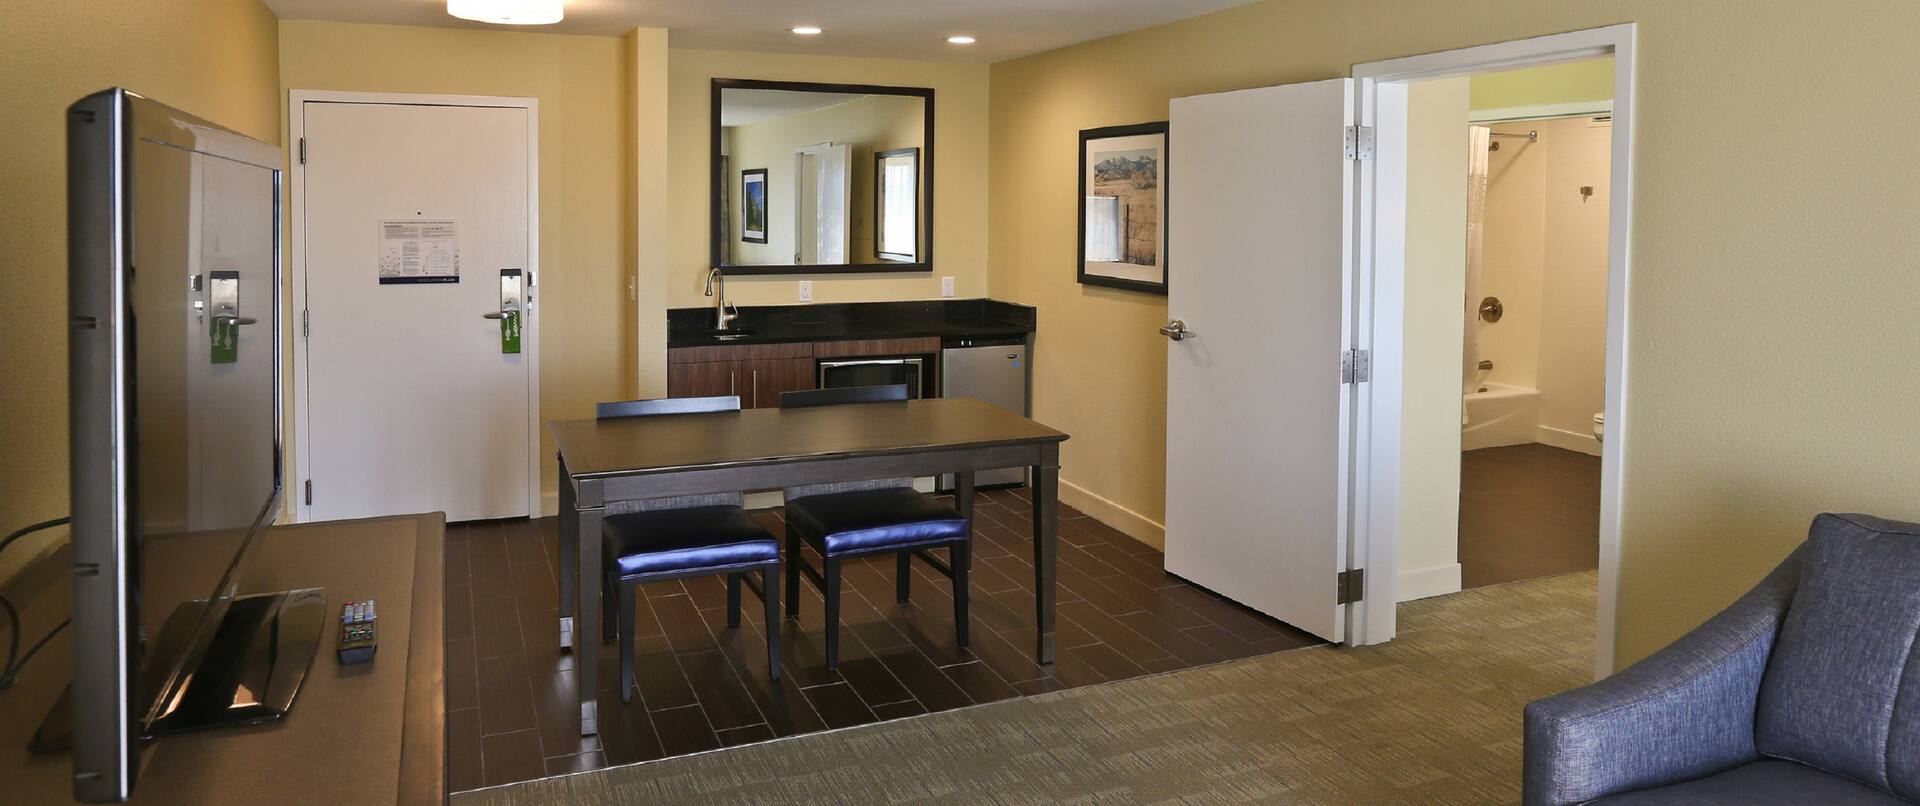 Suite living area with dining table, chairs, wet bar, TV, room entrance, and partial view of lounge sofa